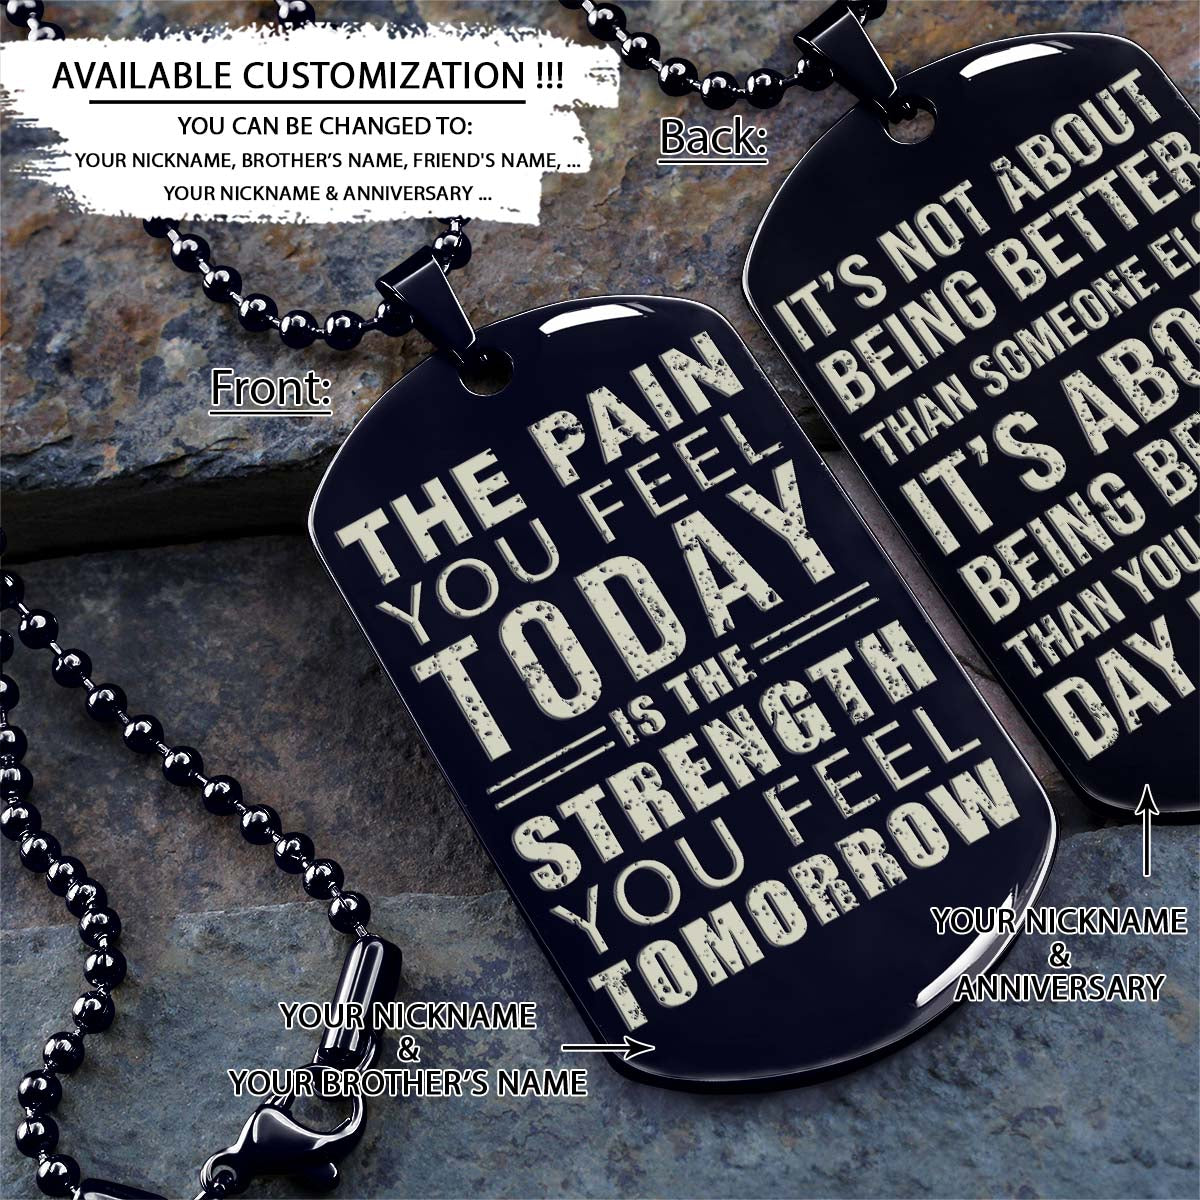 The Pain You Feel Today - It's About Being Better Than You Were The Day Before - Gym - Fitness Center - Workout - Gym Dog Tag - Gym Necklace - Engrave Dog Tag